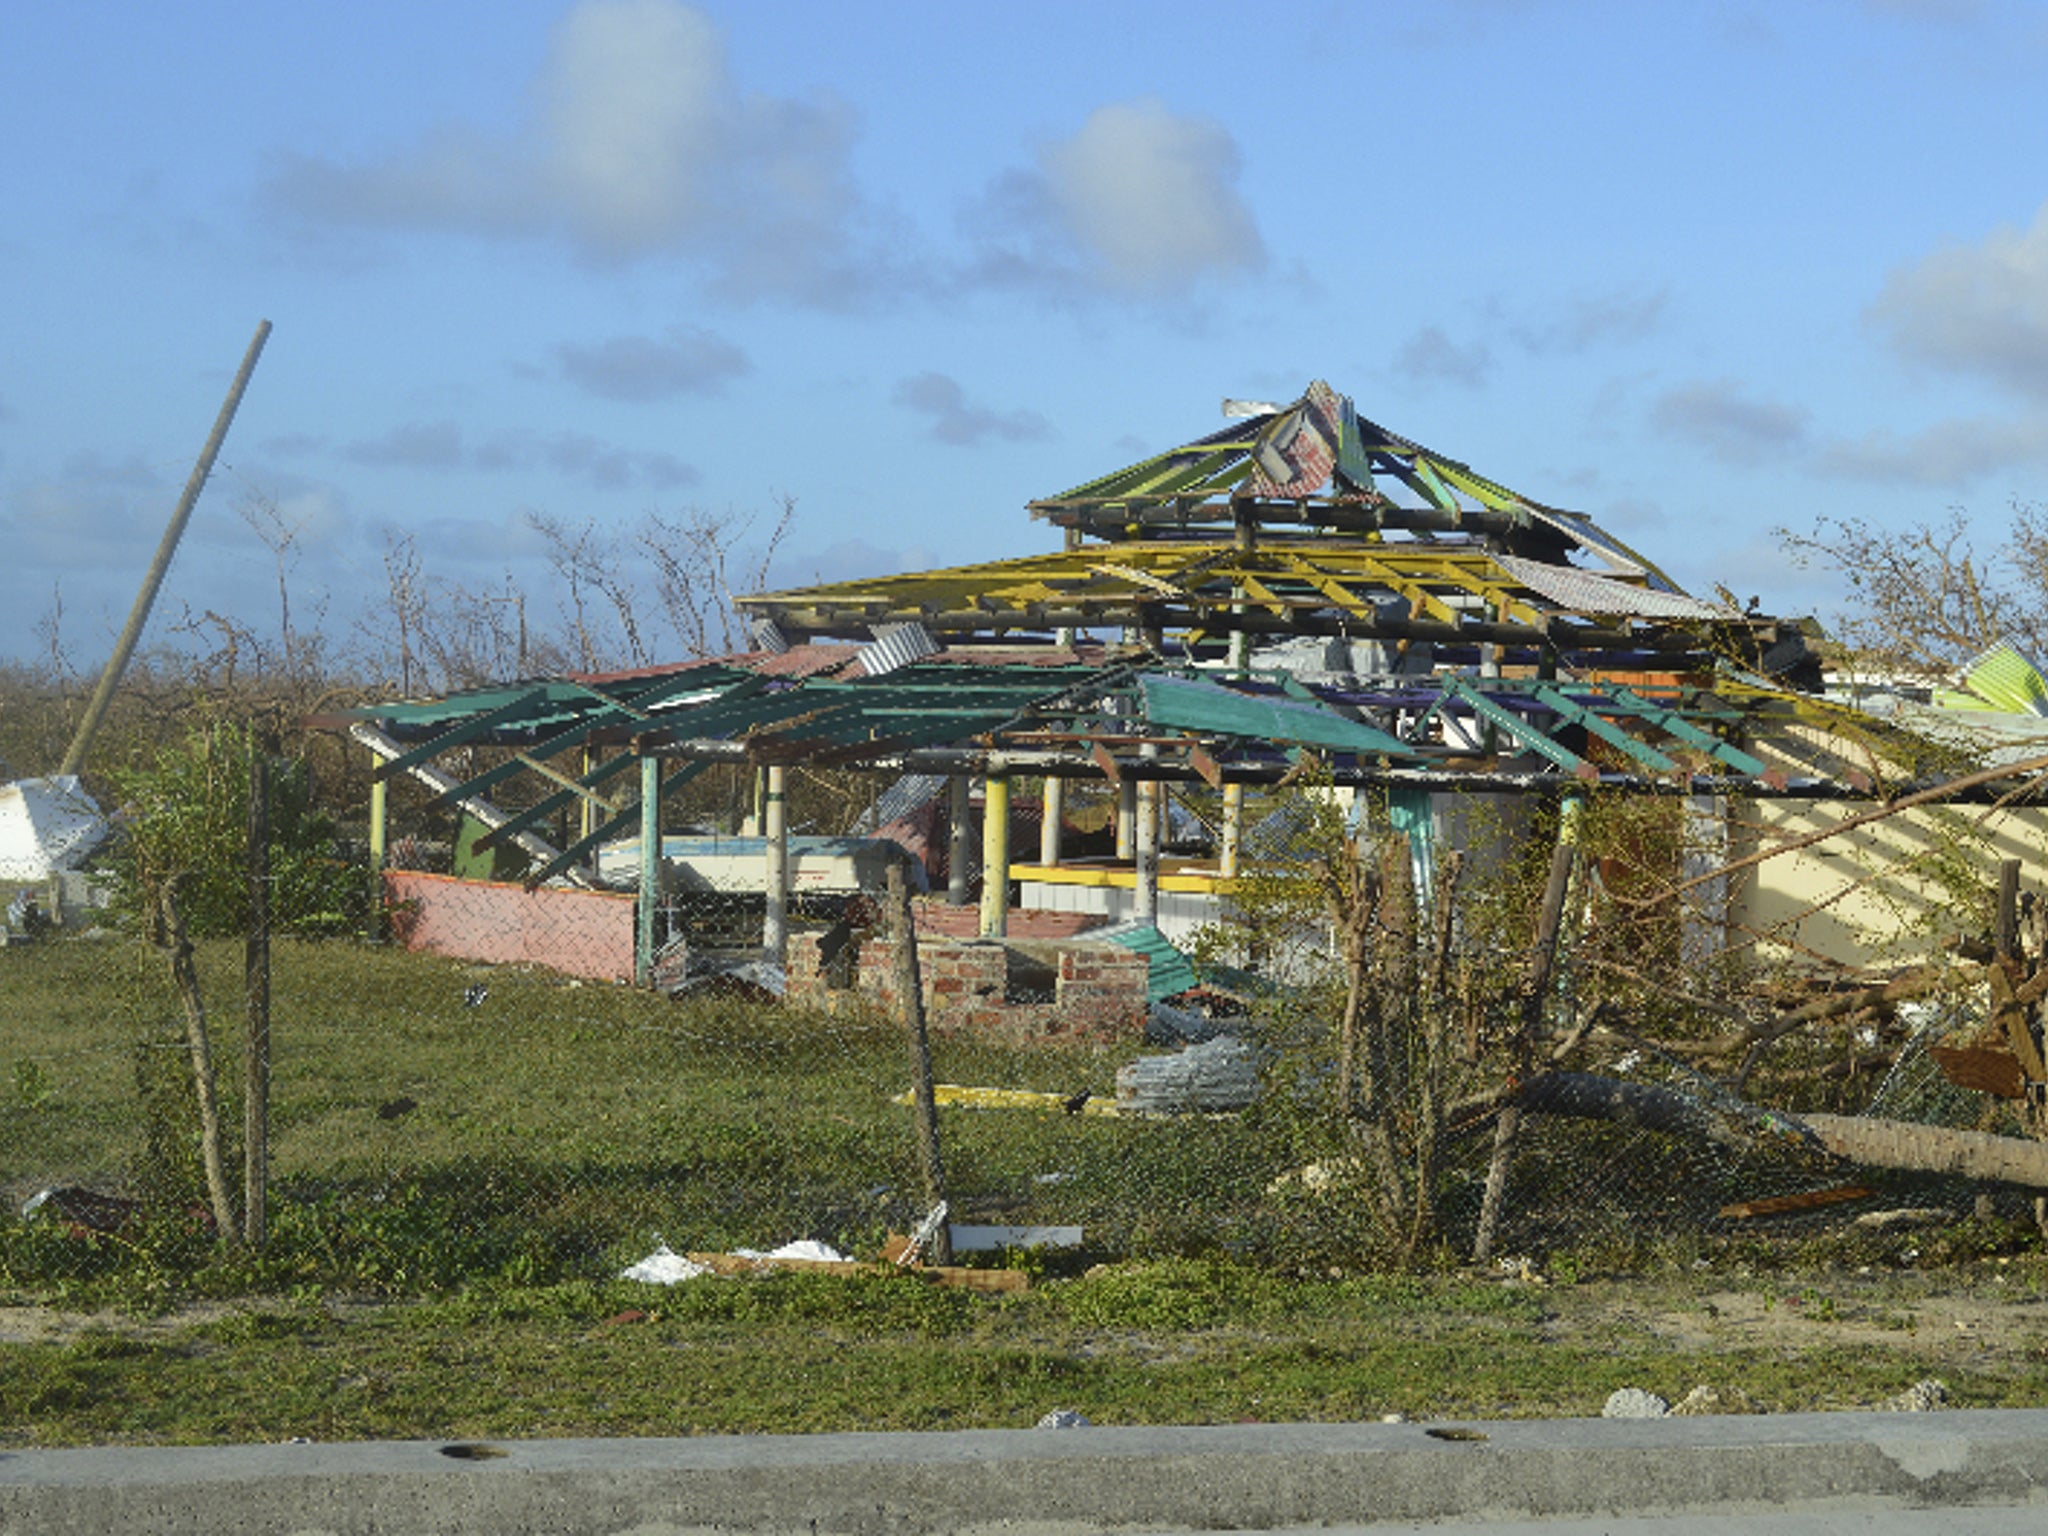 A house on Turks and Caicos Islands destroyed by Hurricane Irma